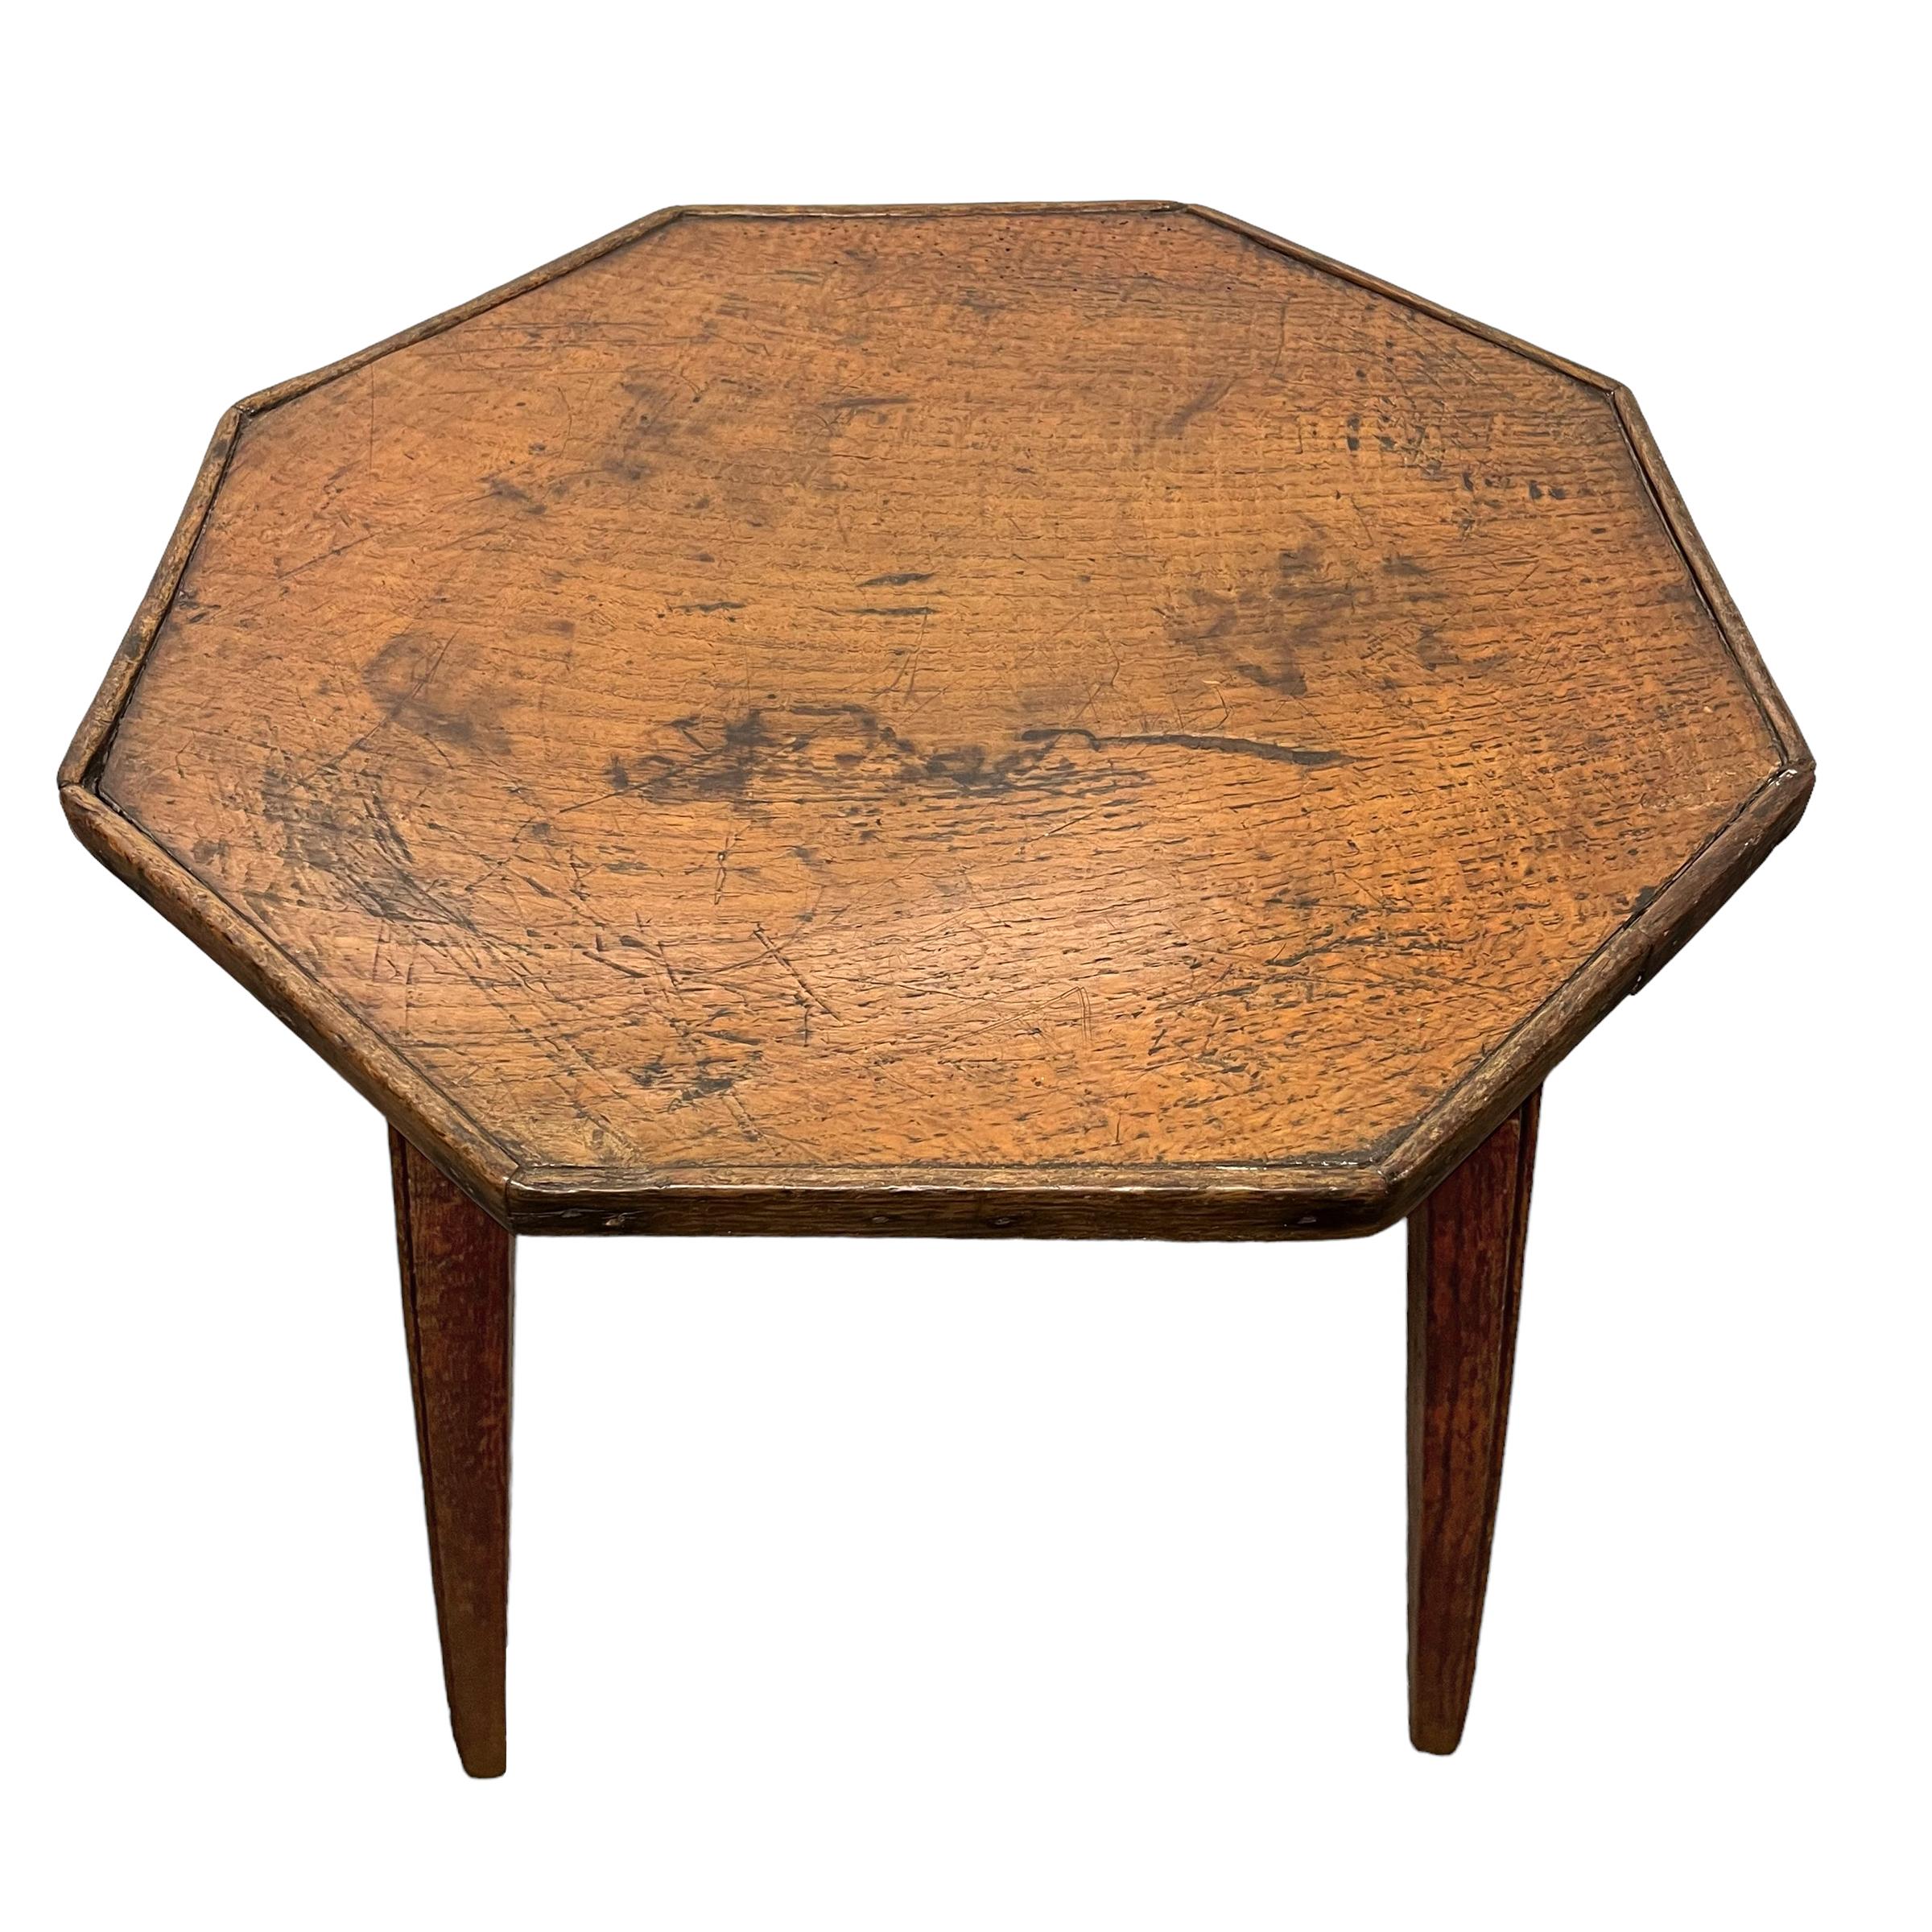 Hand-Crafted 19th Century English Octagonal Cricket Table